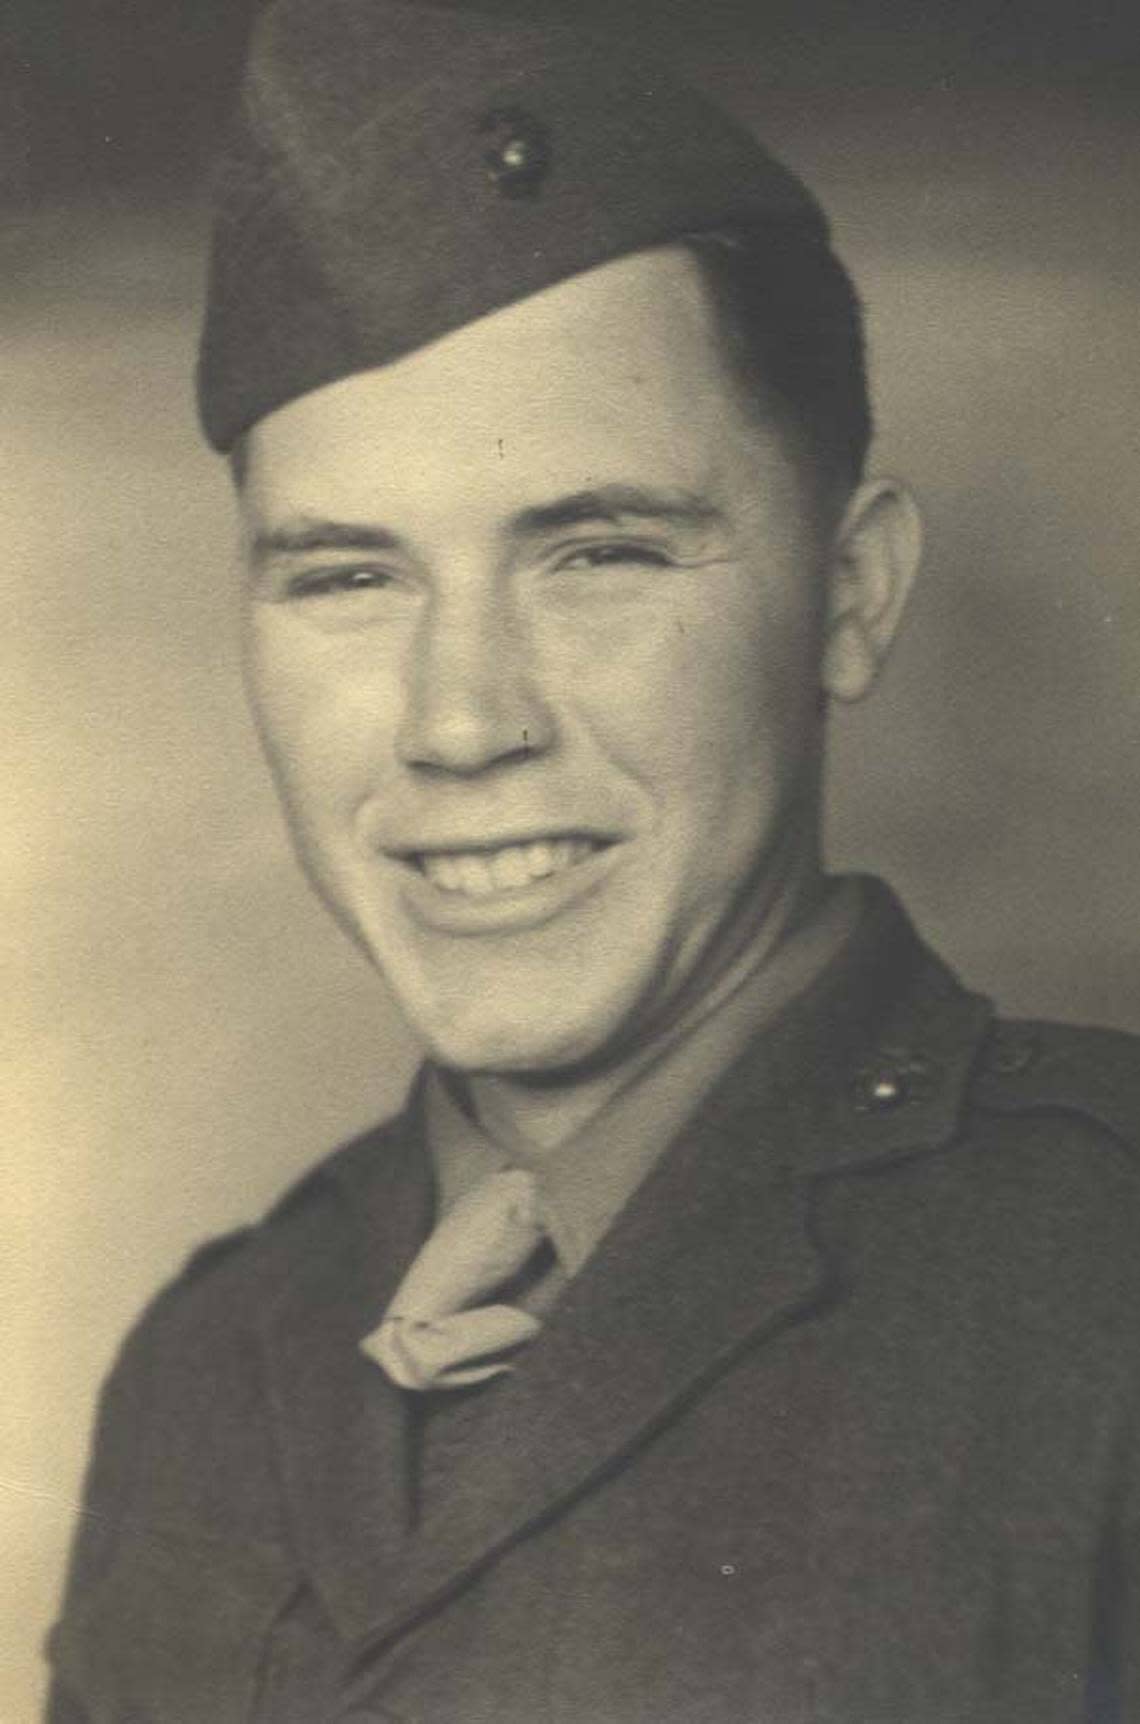 Paul Frederick, Lexington, from his time serving with the U.S. Marines in World War II. His 26th month tour of duty included combat at Iwo Jima and Guadalcanal.